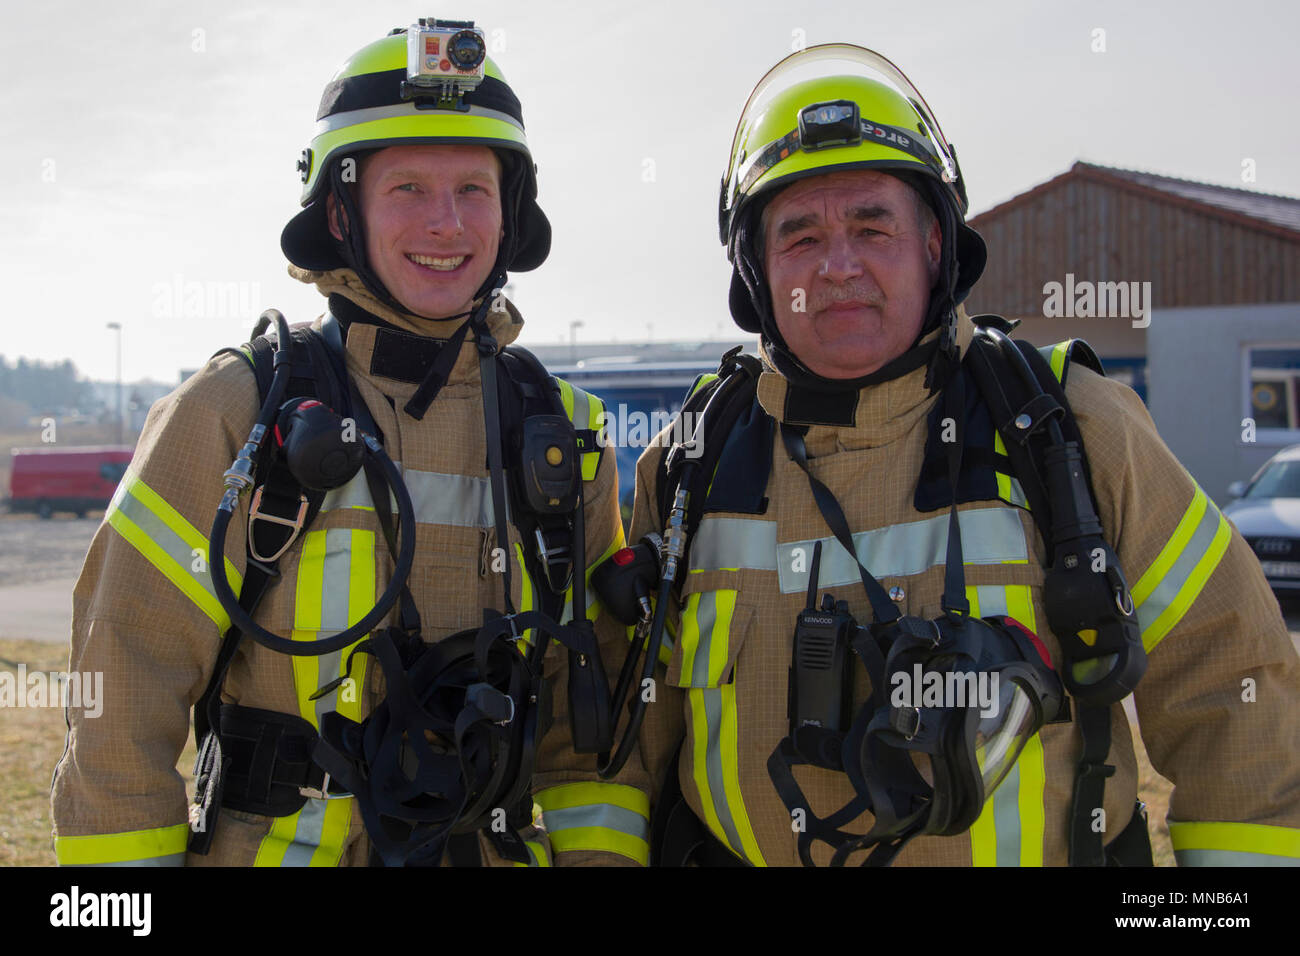 ANSBACH, Germany -- U.S. Firefighters from Ansbach and Grafenwoehr Fire Departments conduct joint live fire training at the Urlas fire emergency training facility March 15, 2018.  Two of the Fire Fighters Rudolf and Patrick Dobmann pictured are father and son; Rudolf Dobmann has worked for 33 years for the Grafenwoehr Fire Department. His son, Patrick has worked there since 2015. (U.S. Army Stock Photo